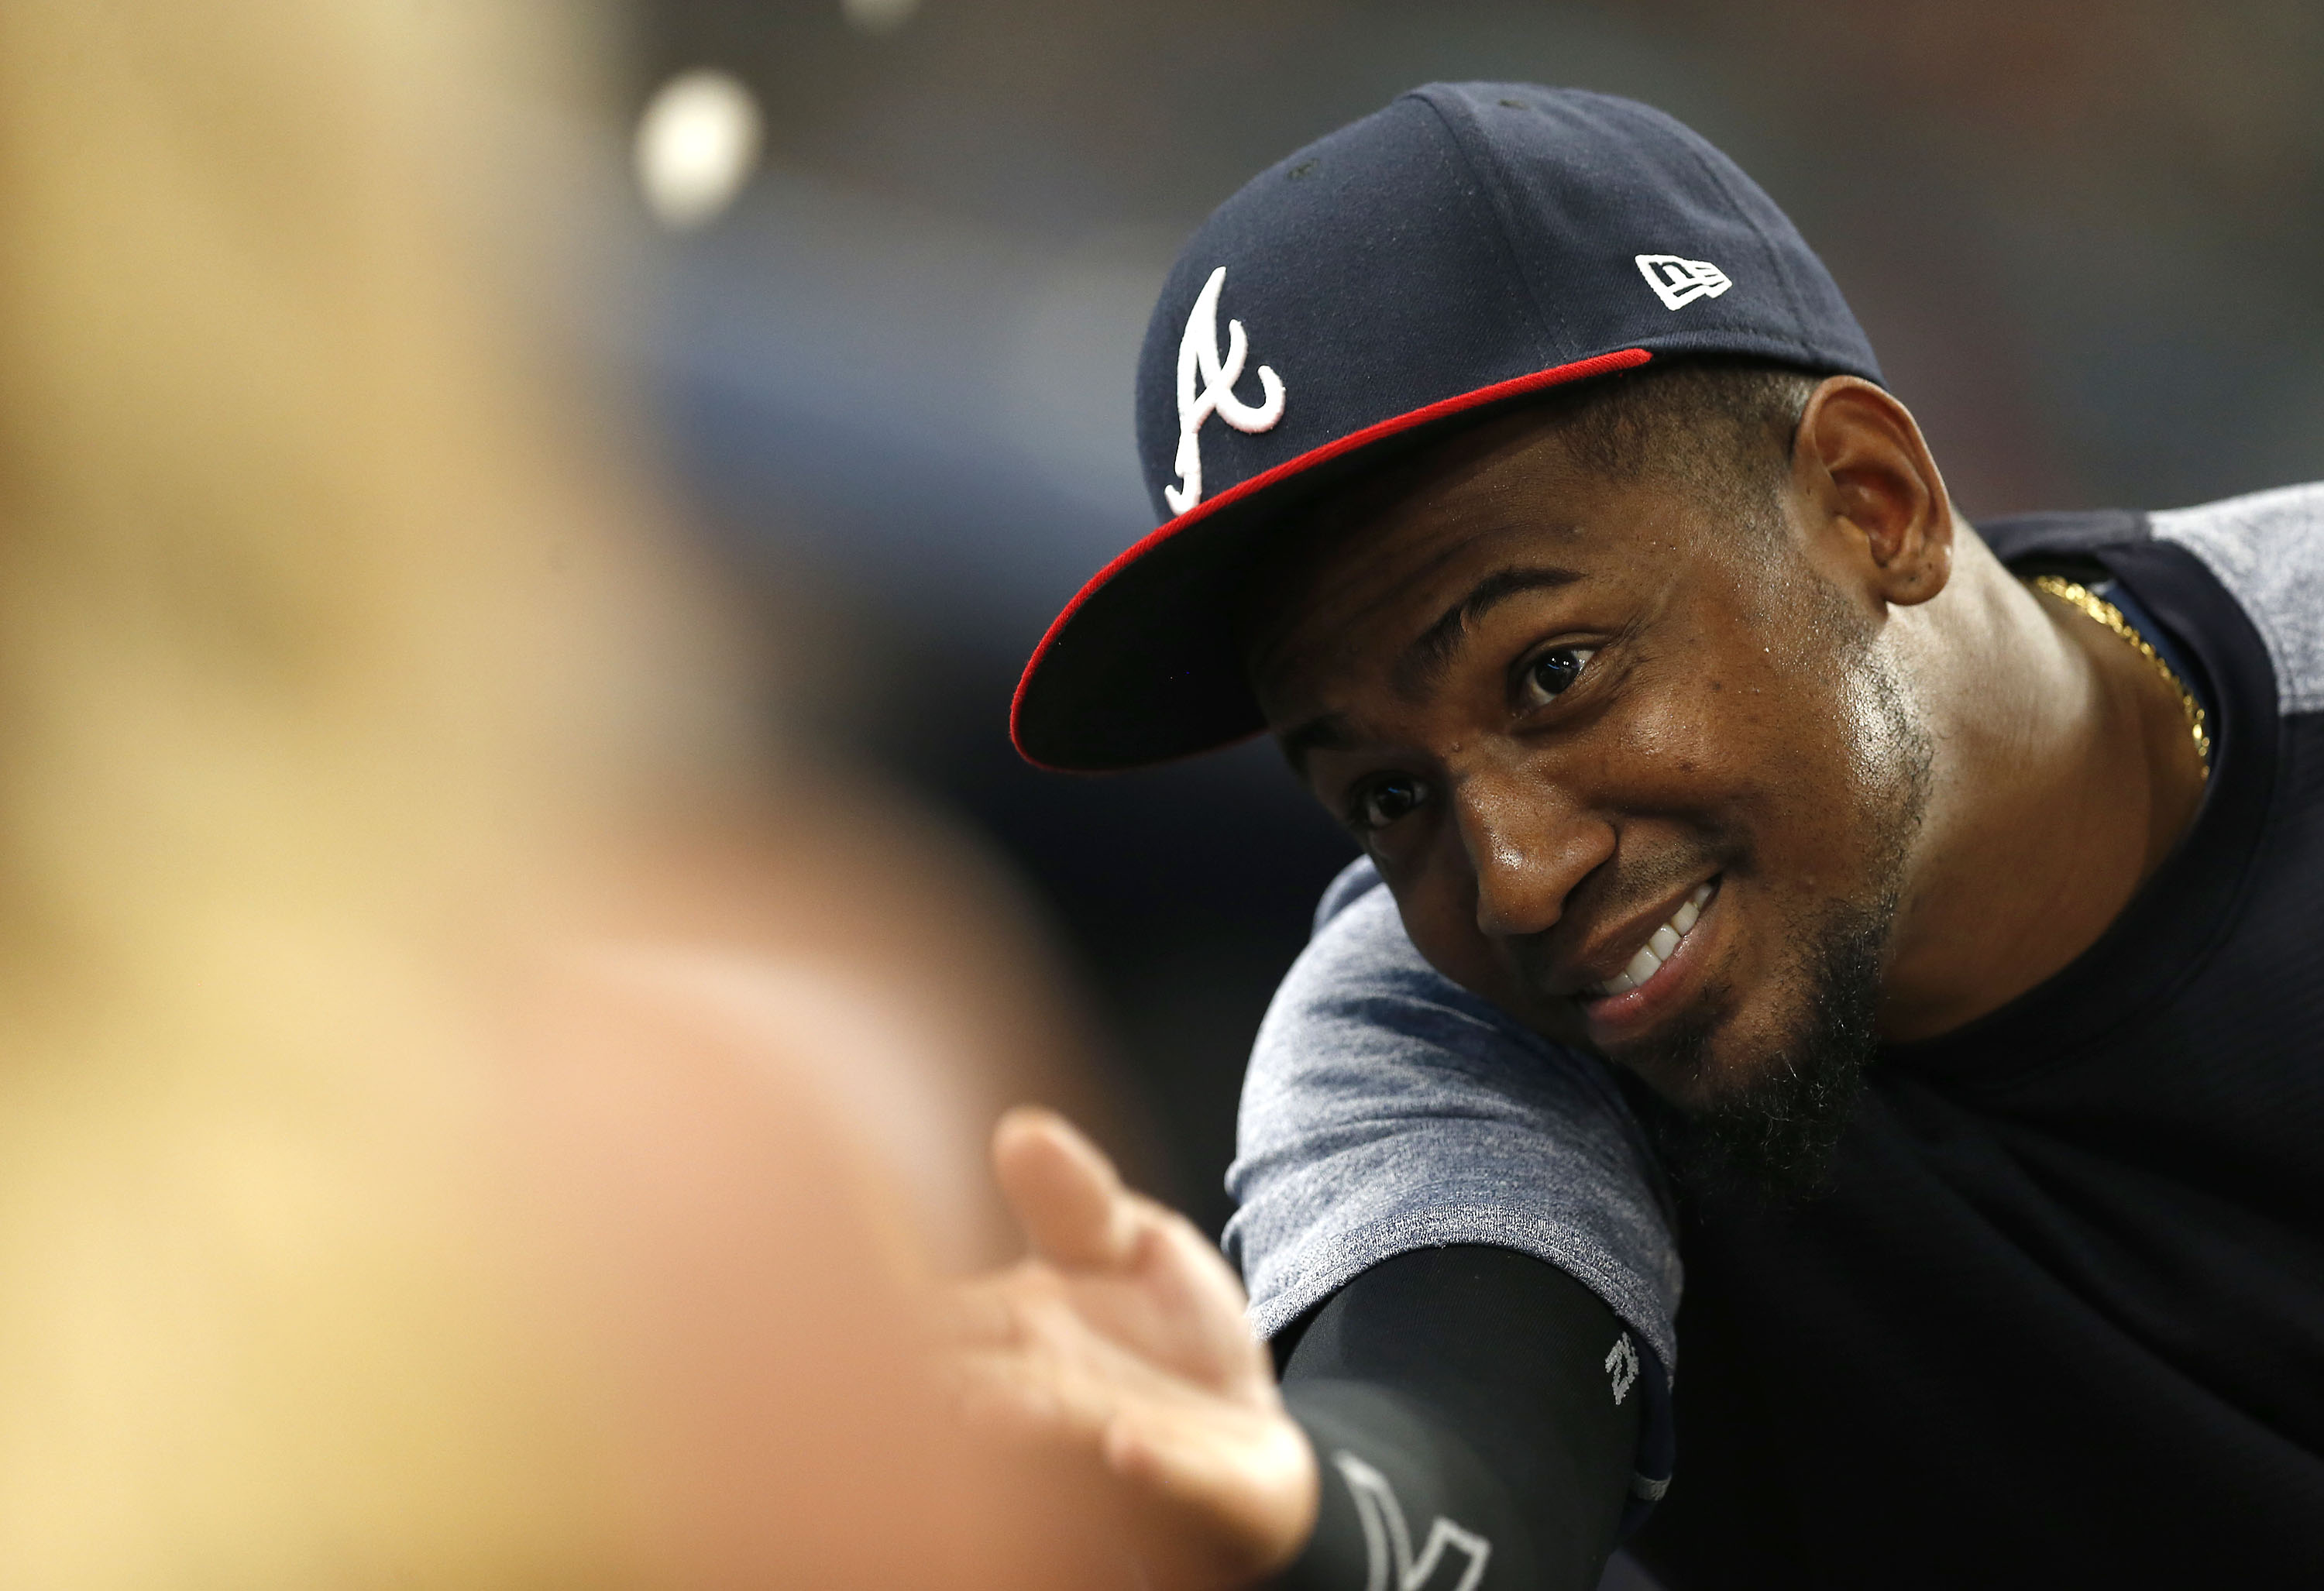 Braves rumors: what can Braves fans expect from a Julio Teheran trade?